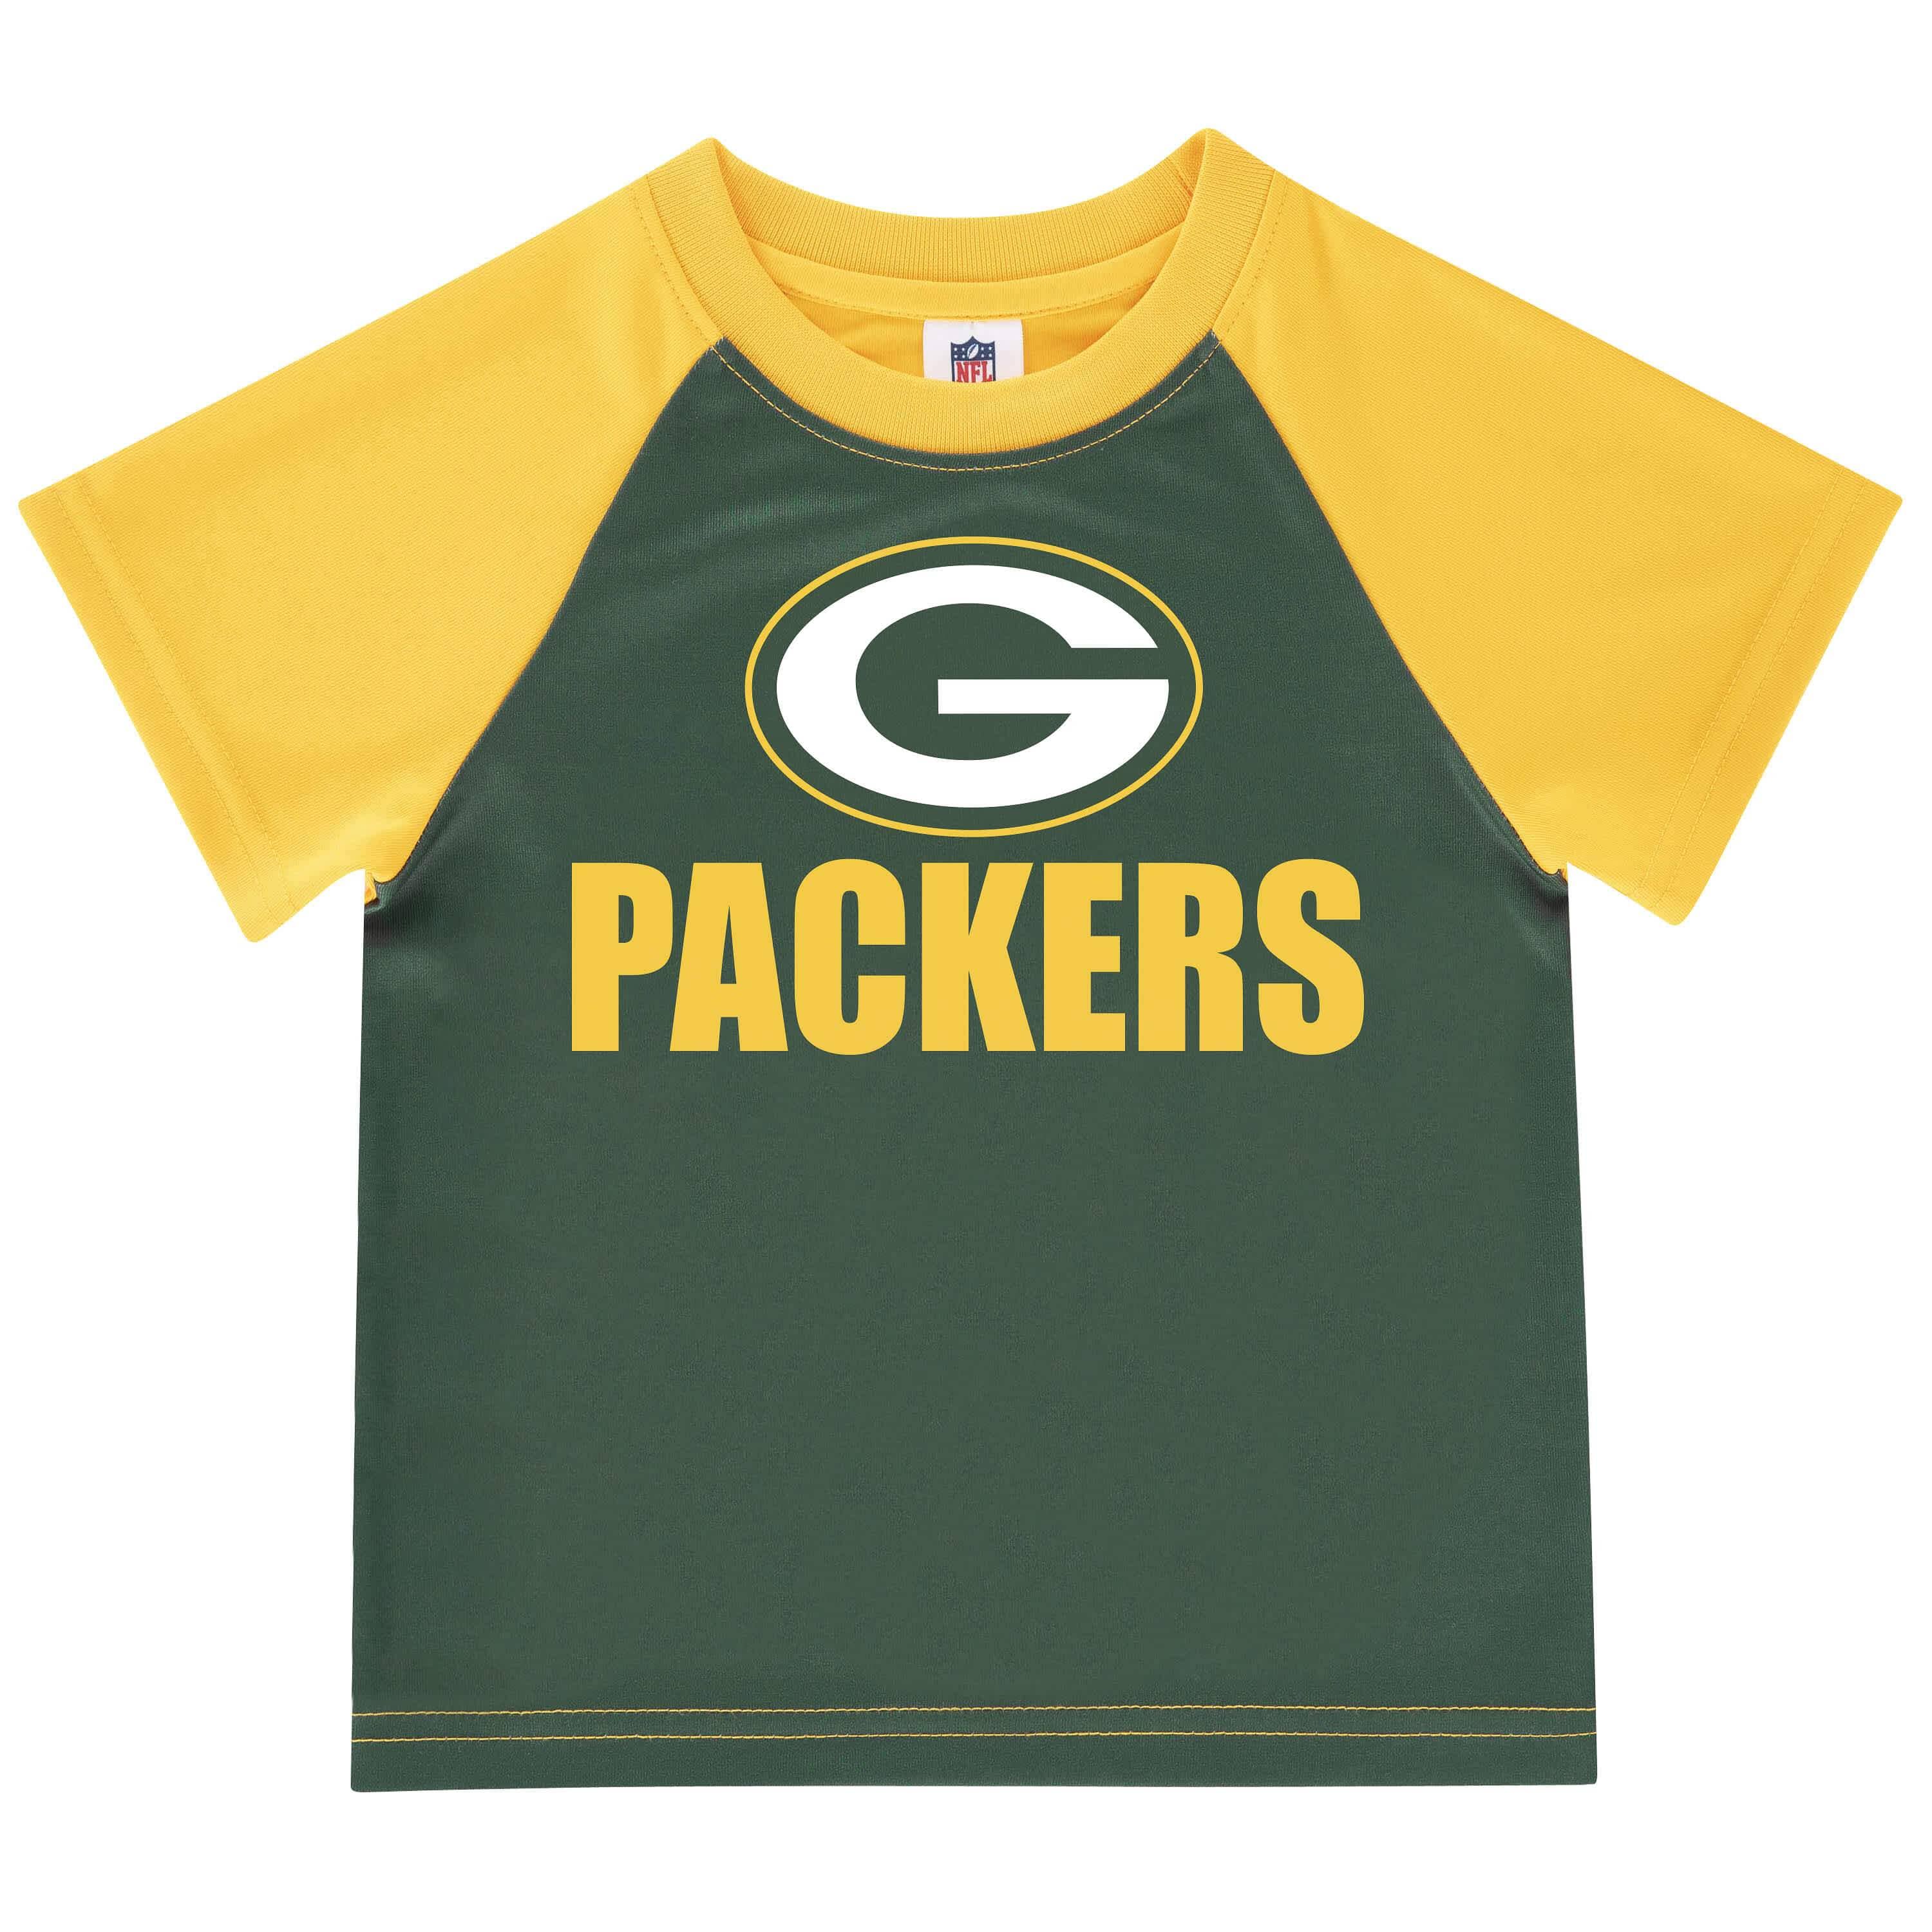 Packers Toddler NFL Green Bay Packers Tee